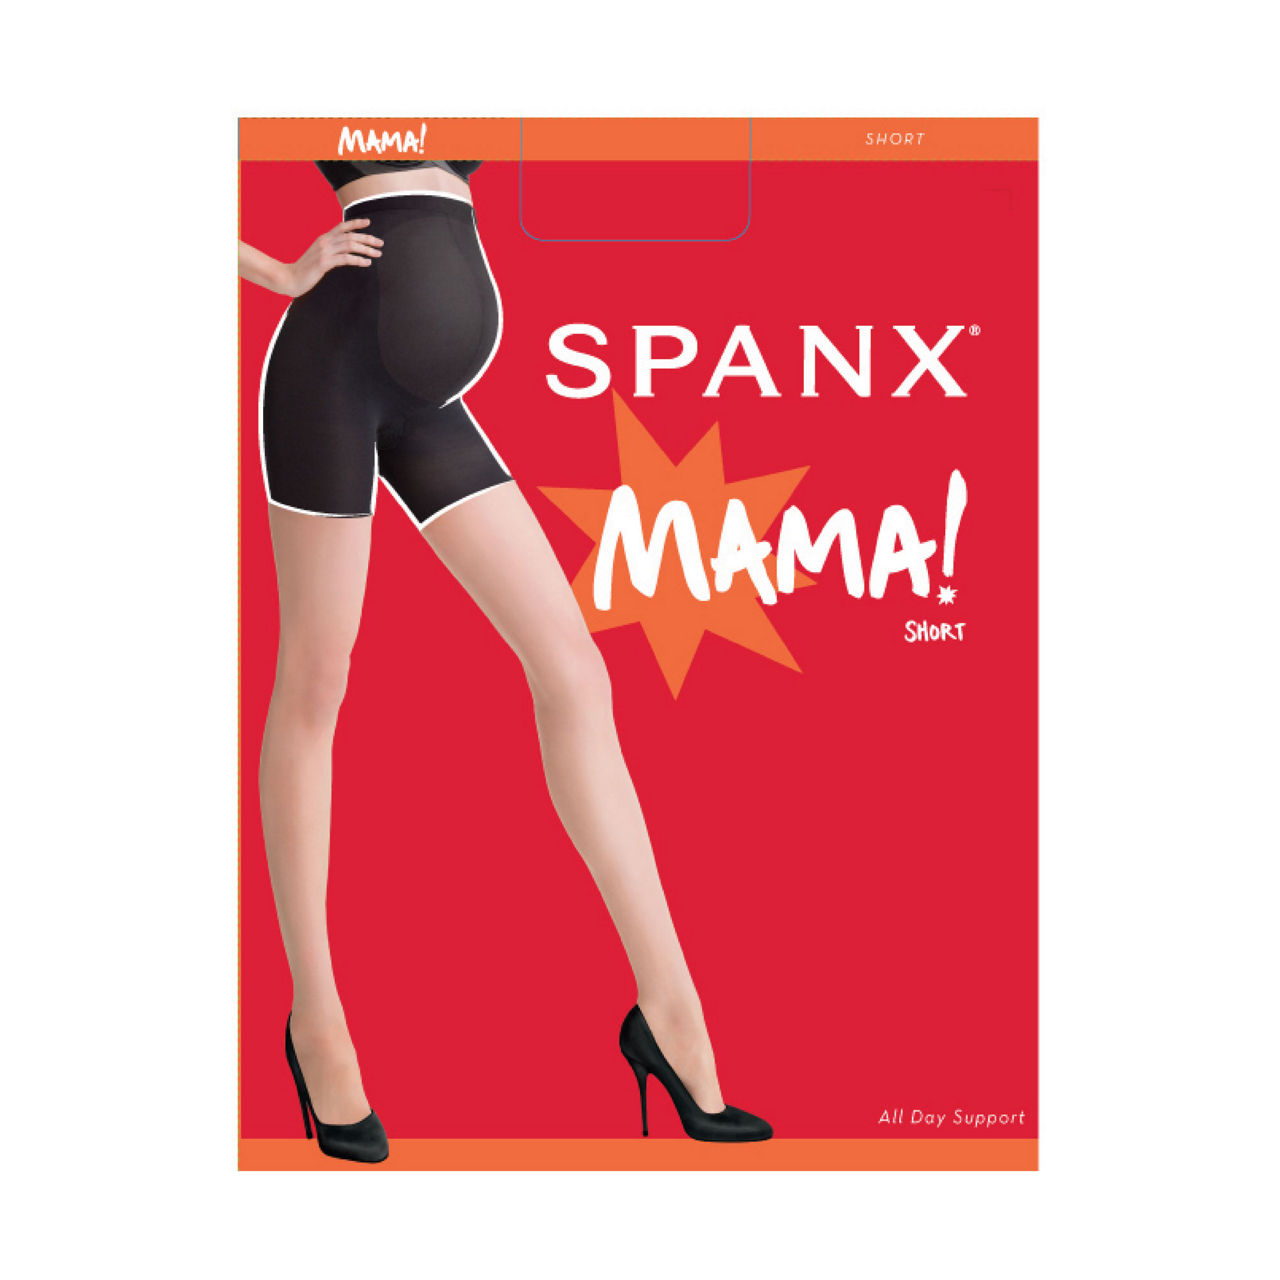 SPANX Maternity Shorts, shorts, Mama approved ✓ Bump supported ✓ Get back  to the bump and grind with our comfortable maternity styles. #Spanx # Maternity Shop our Mama Shorts